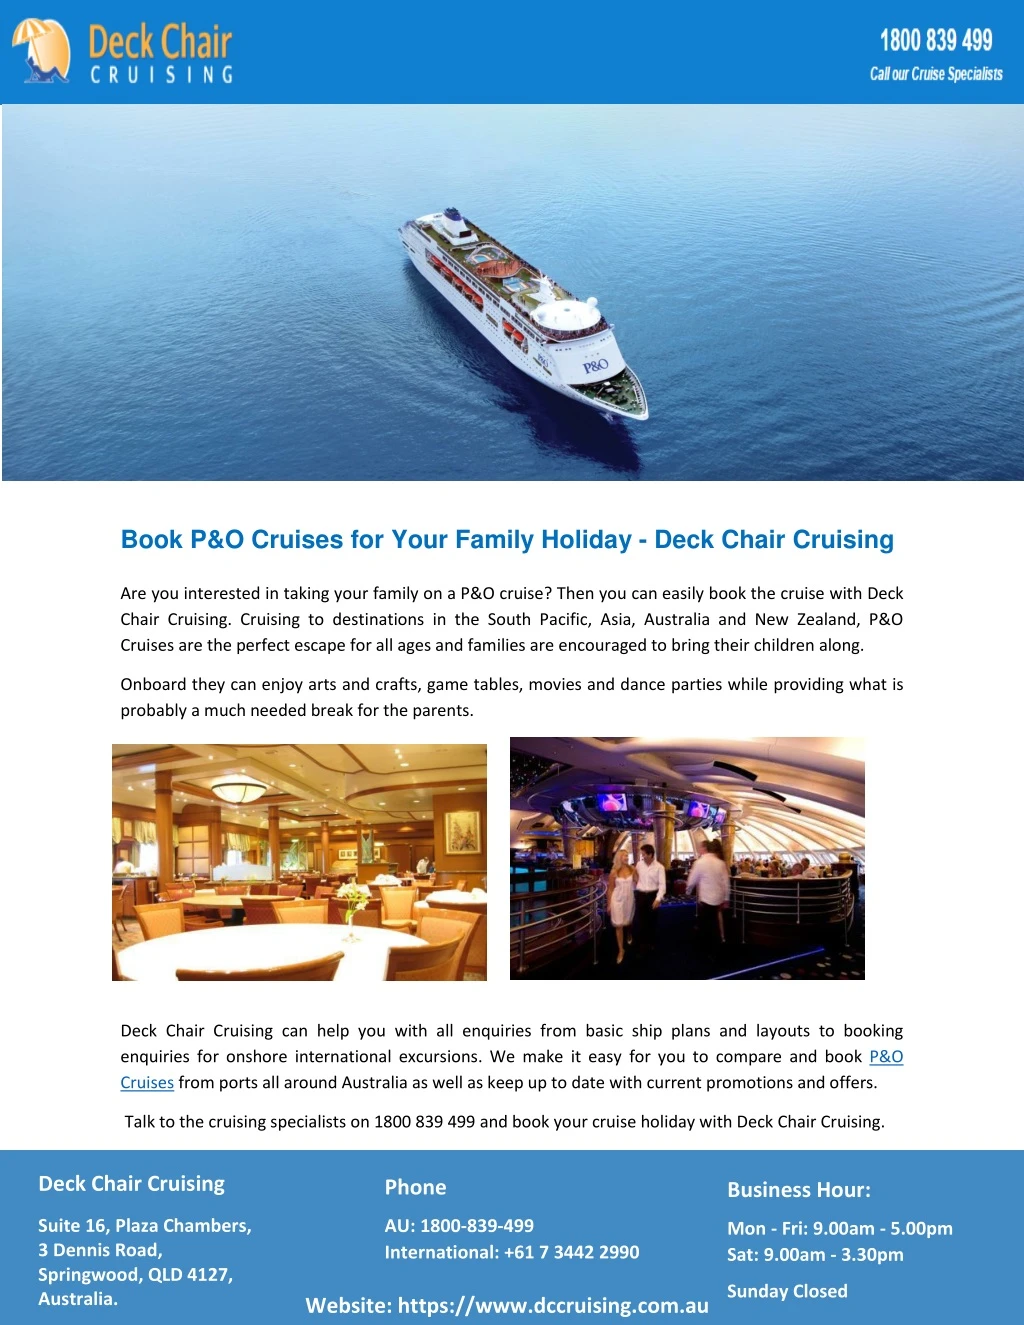 PPT Book P&O Cruises for Your Family Holiday Deck Chair Cruising